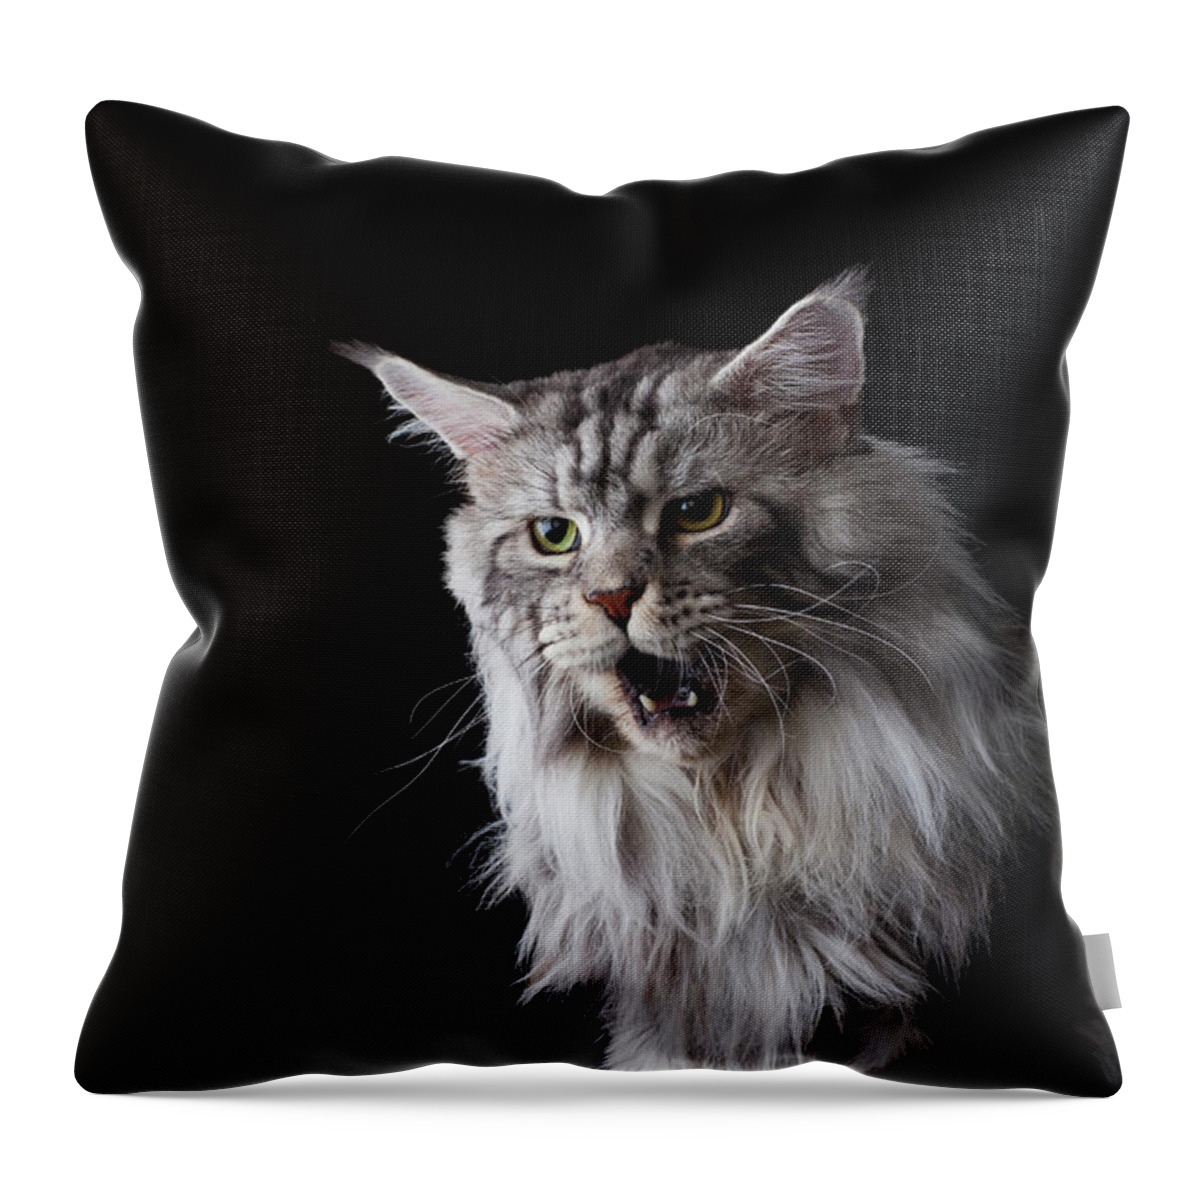 Three Quarter Length Throw Pillow featuring the photograph Maine Coon Cat by Ultra.f